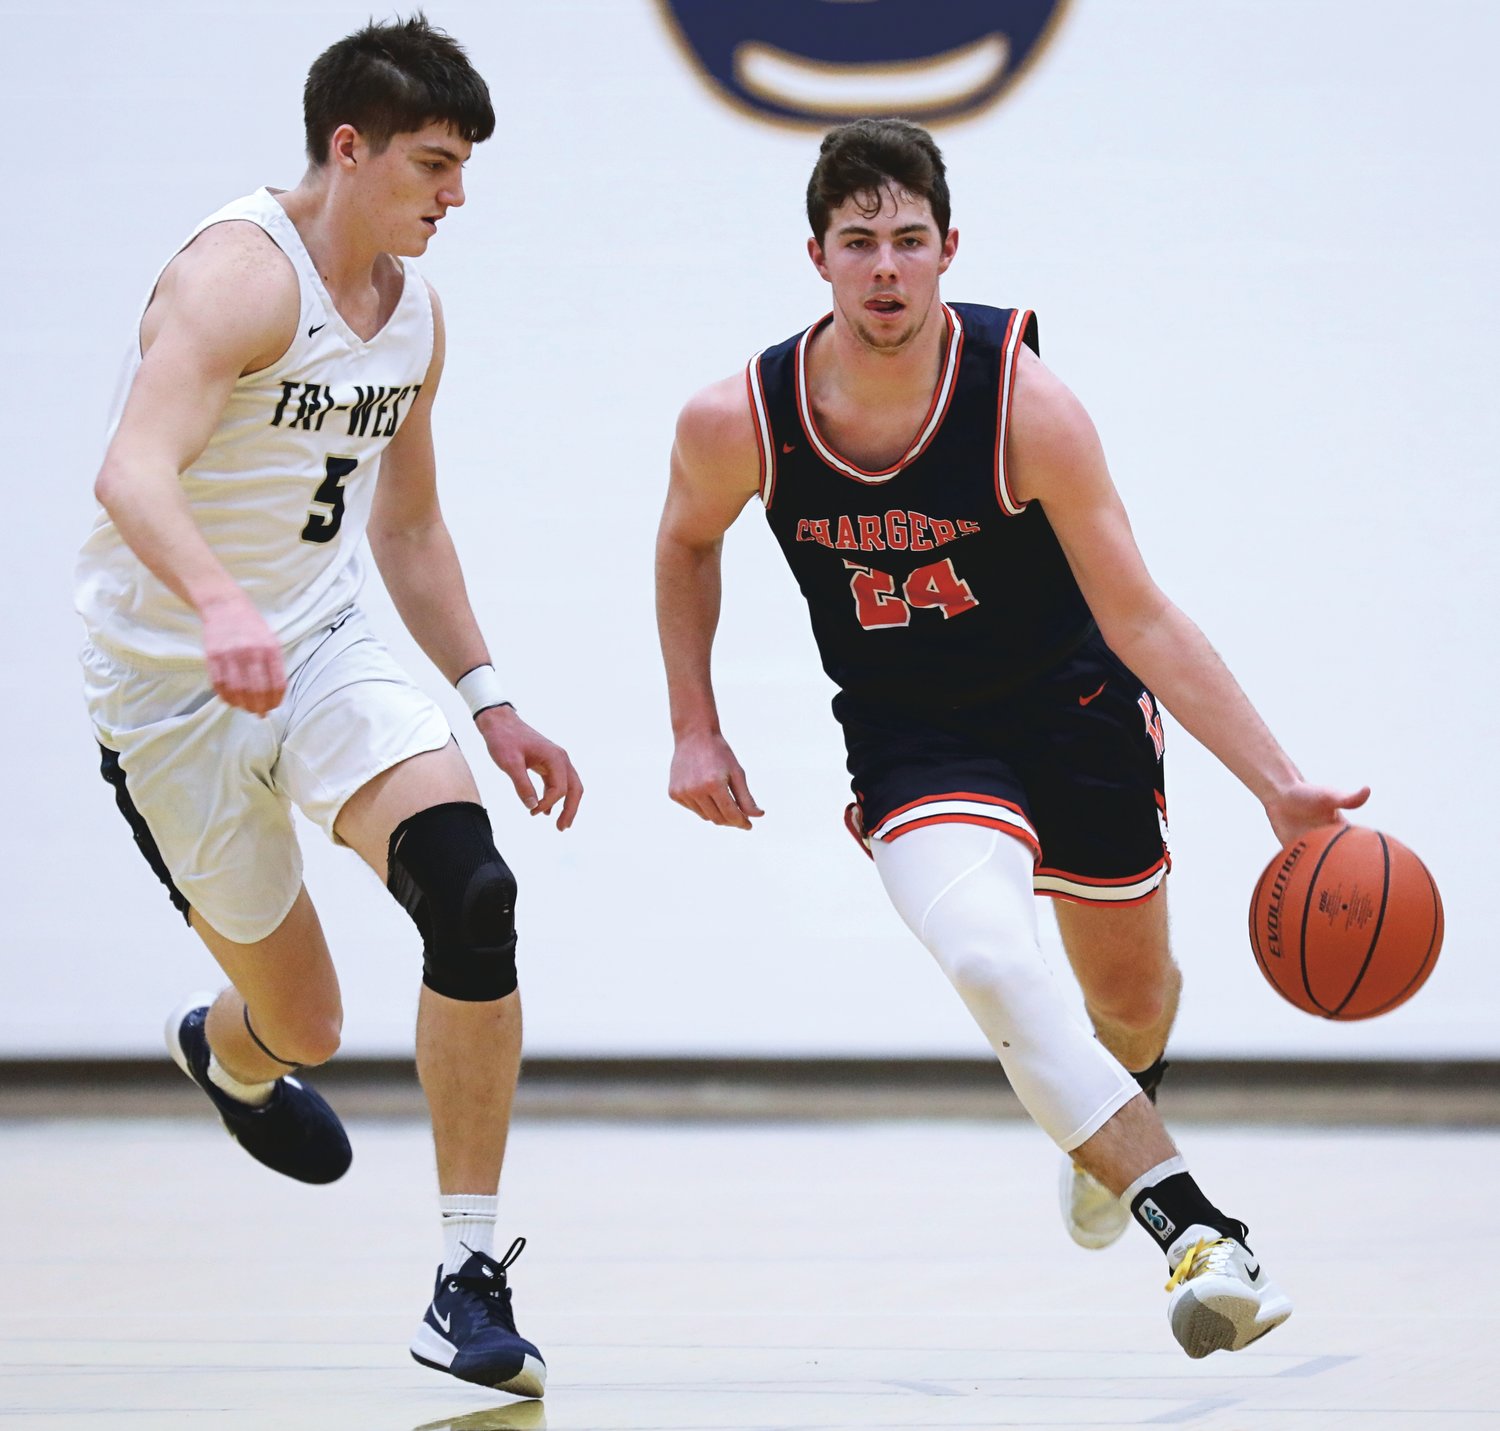 North Montgomery's Alex Wallace led the Chargers with 16 points in a 77-60 loss at Tri-West on Friday.